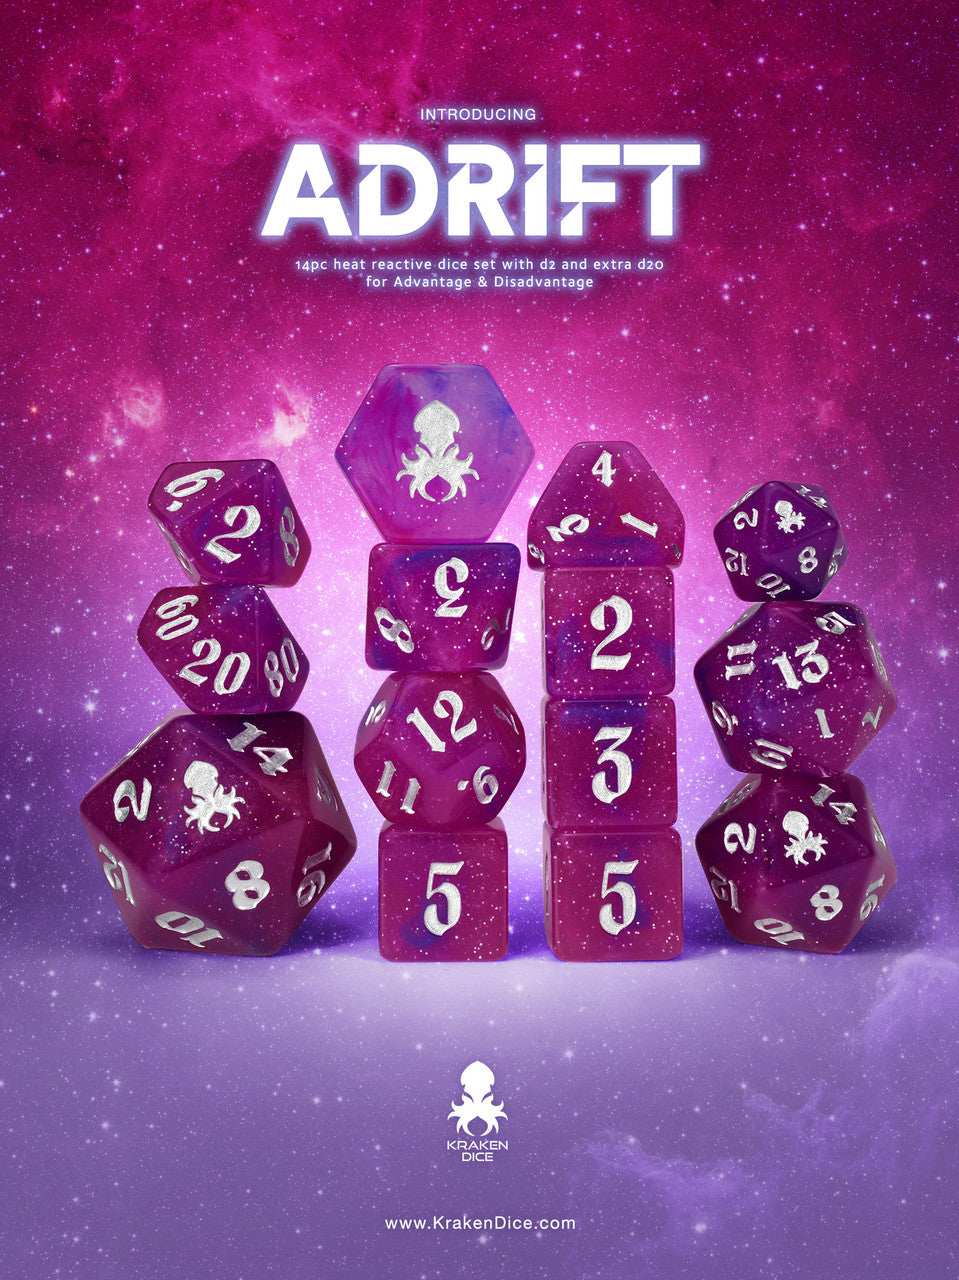 Adrift Heat Reactive 14pc Dice Set for TTRPGs inked in Silver